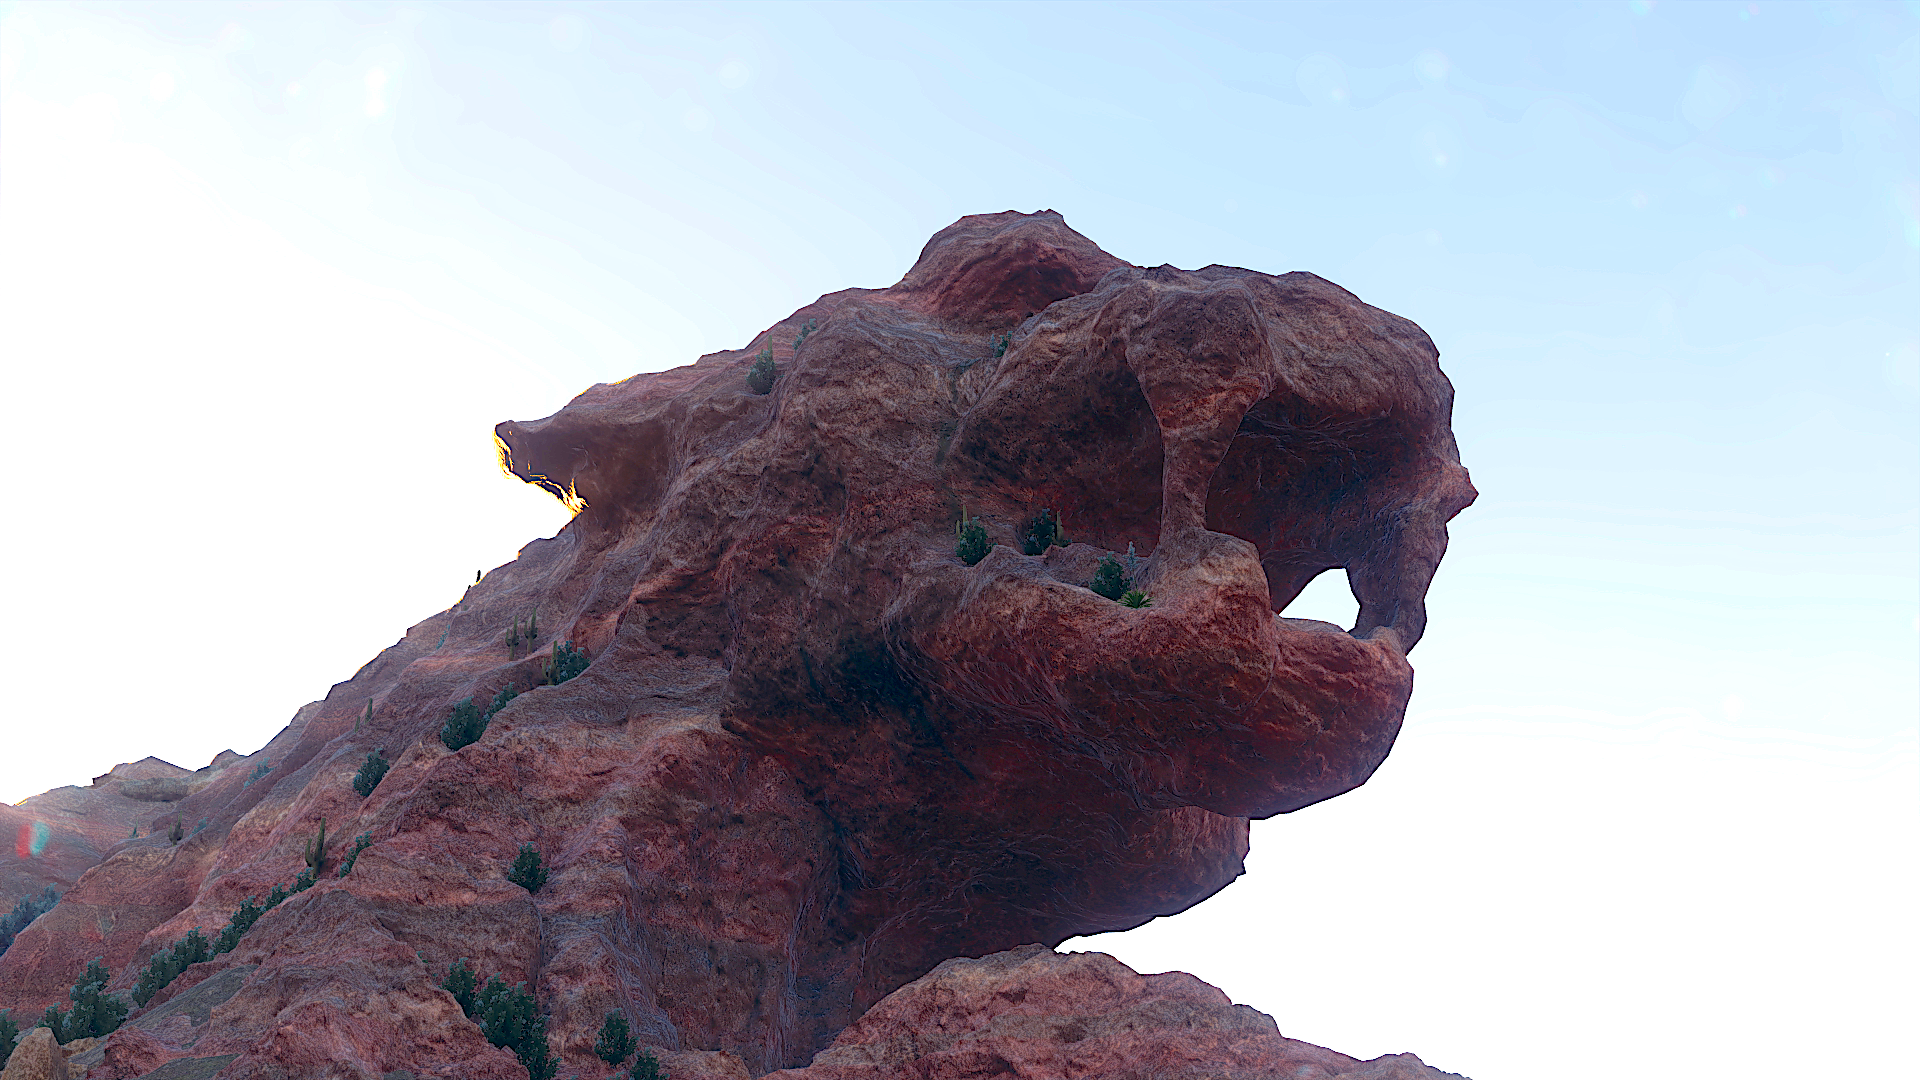 An image of a panther-shaped rock formation in Saints Row.